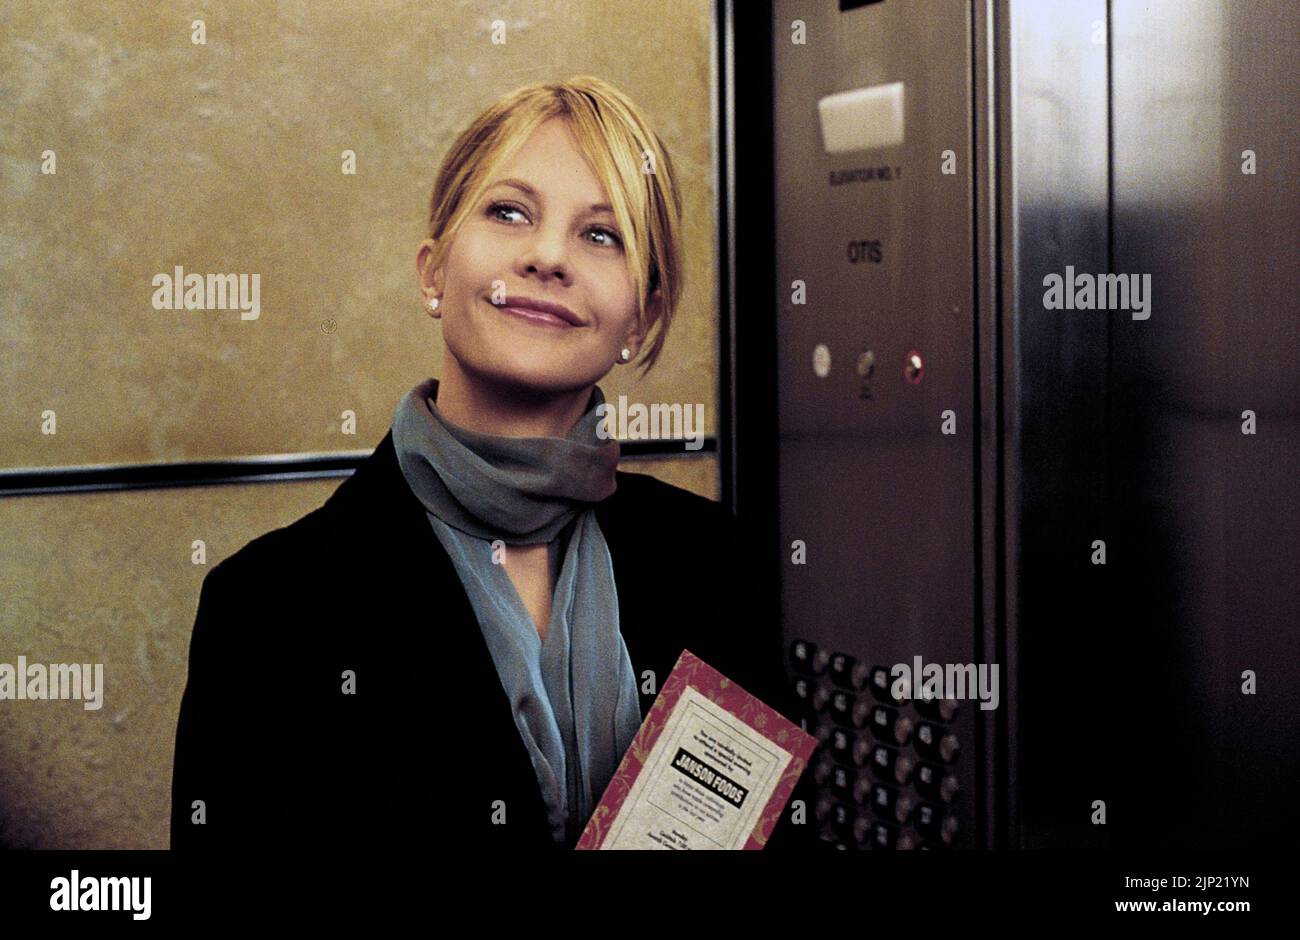 MEG RYAN in KATE & LEOPOLD (2001), directed by JAMES MANGOLD. Credit: MIRAMAX / Album Stock Photo